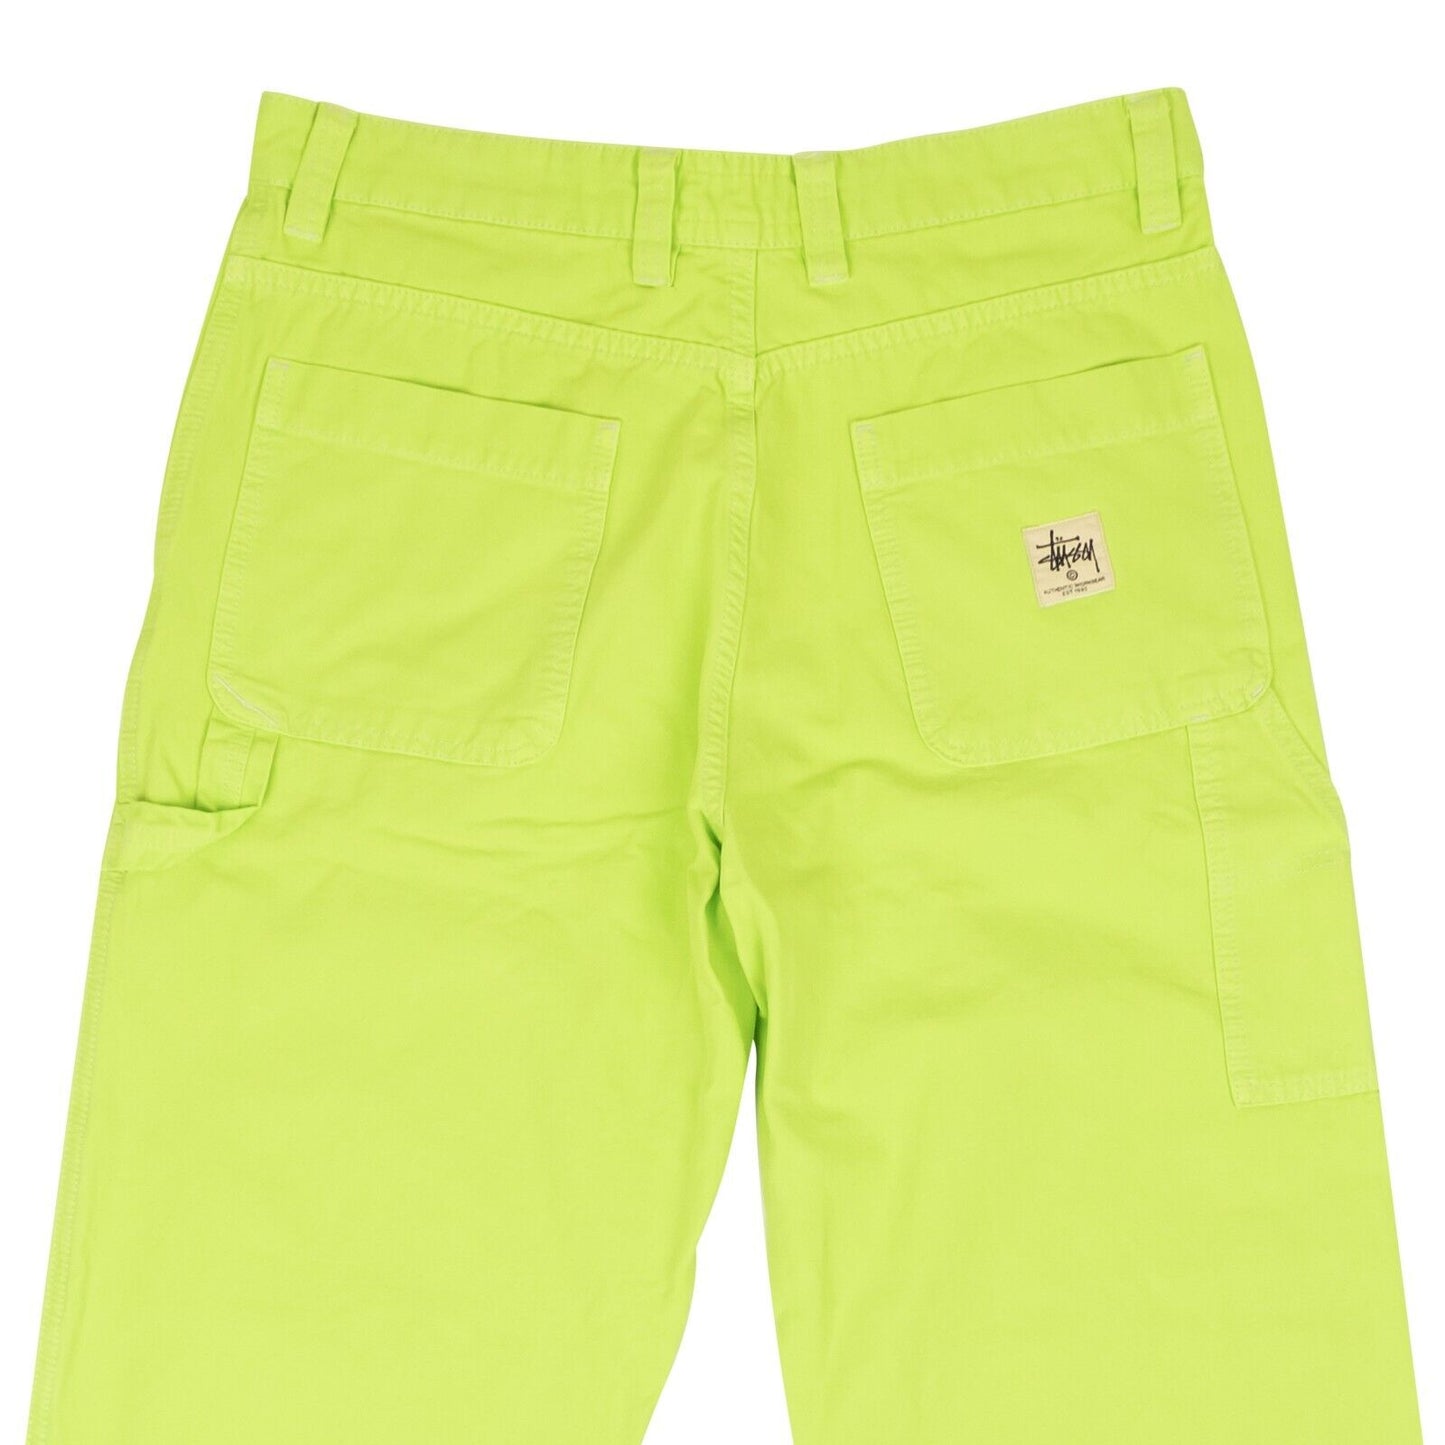 Stussy Cotton Dyed Canvas Casual Work Pants - Neon Yellow